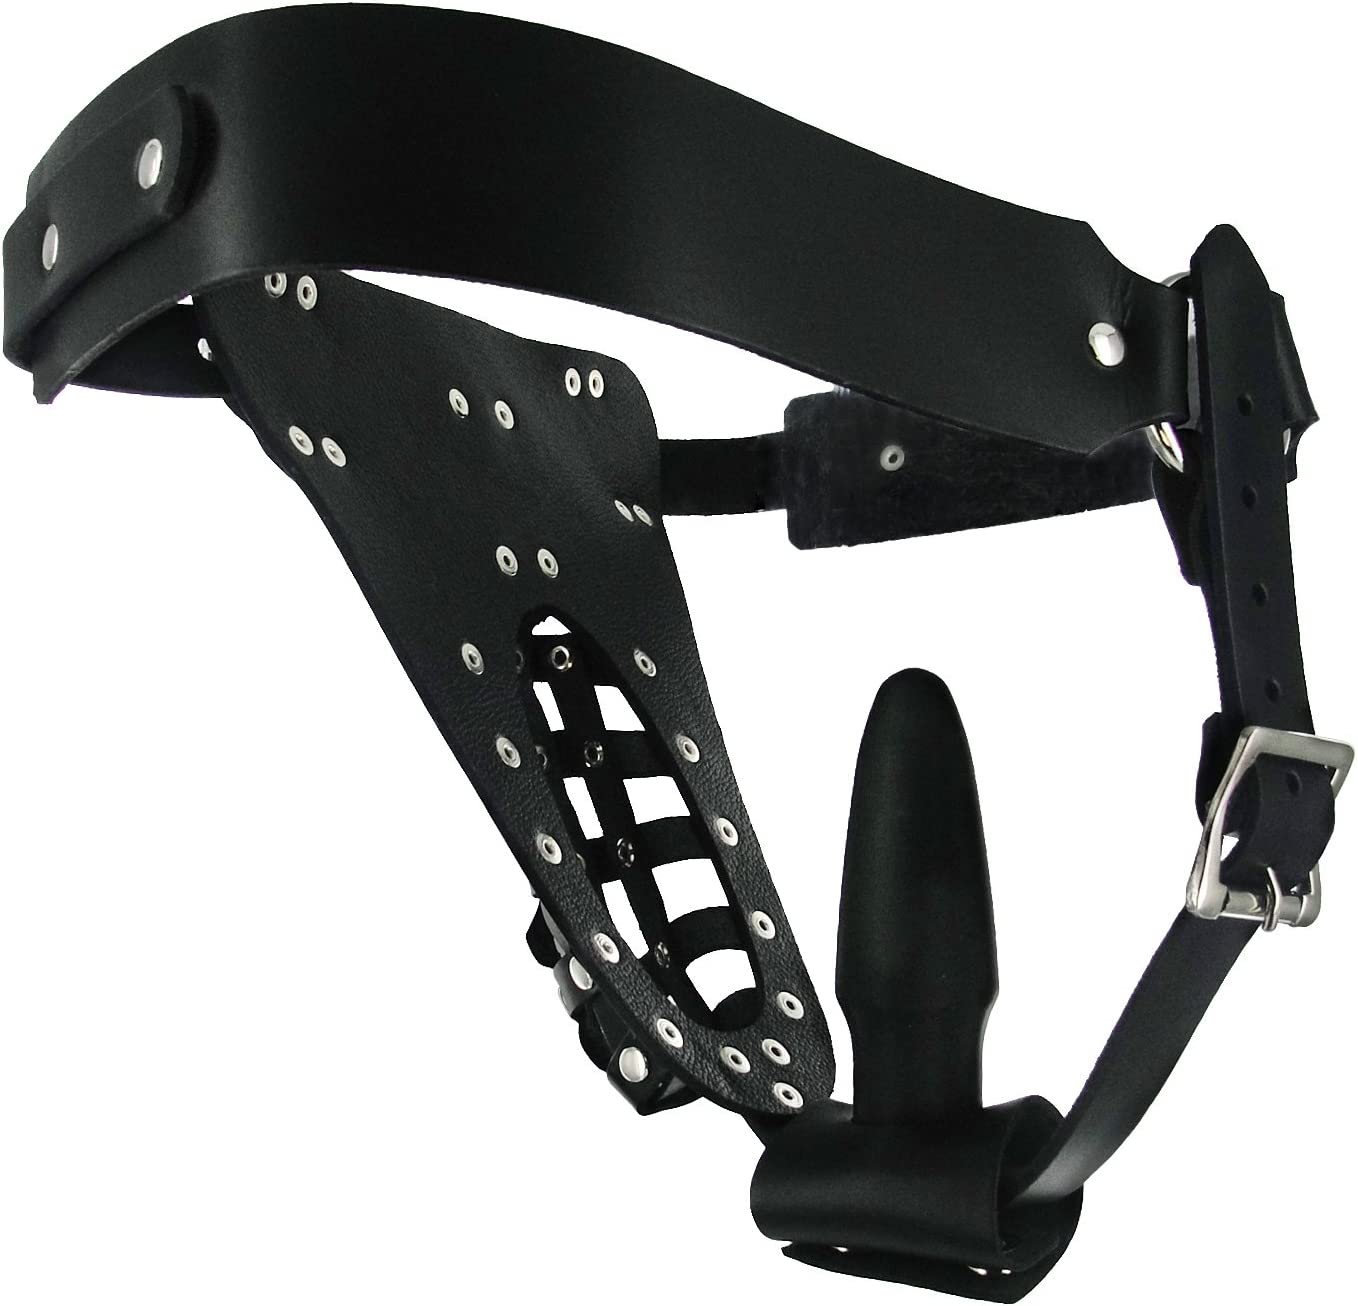 Strict Leather The Safety Net Leather Male Chastity Belt with Anal Plug Harness